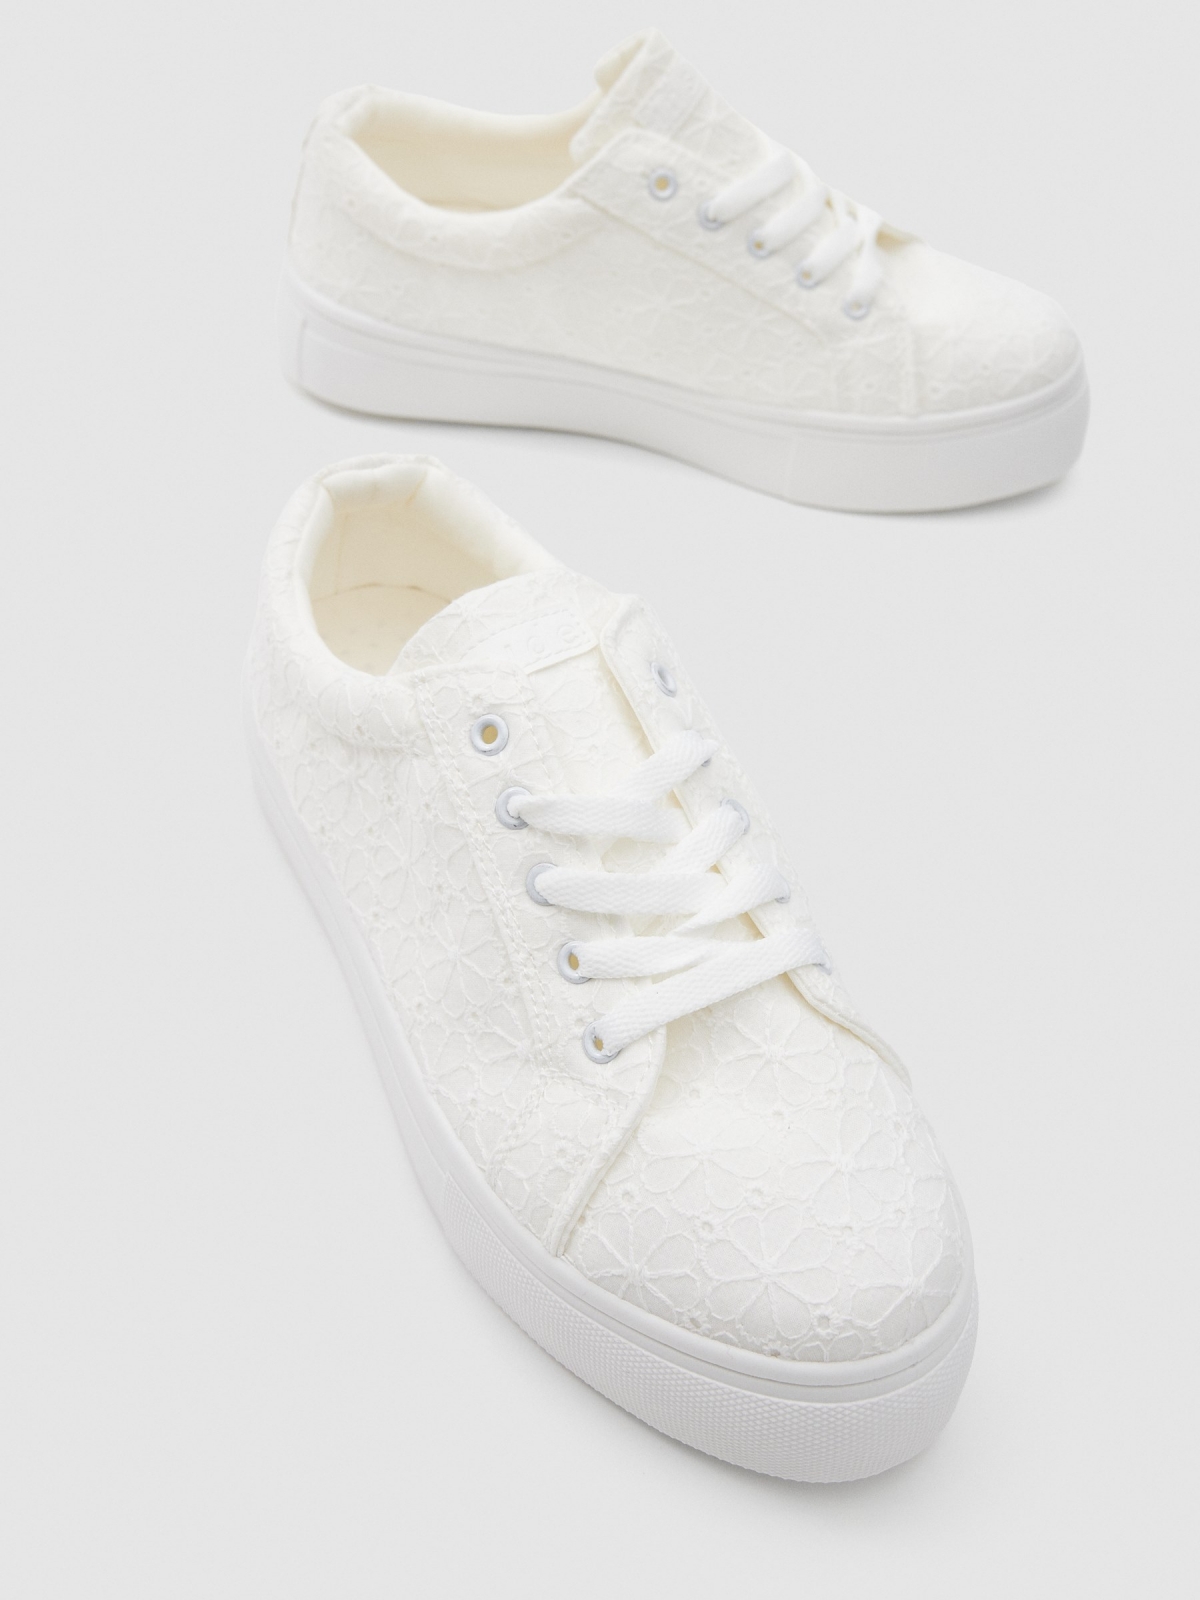 Embroidered white sneaker white detail view